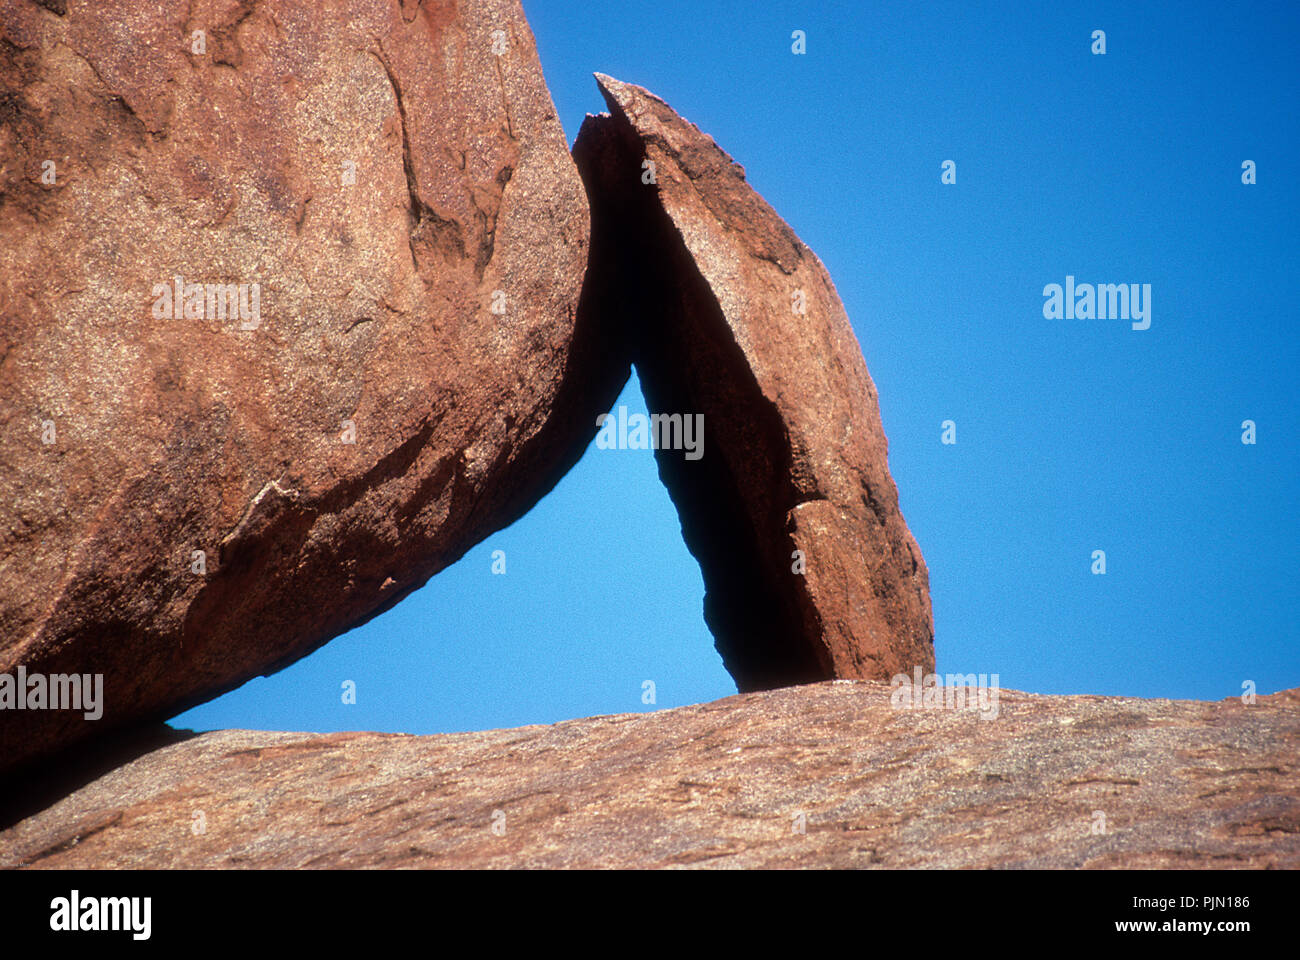 The Olgas - a rock formation in the 'Red Centre' in the Australian outback Stock Photo